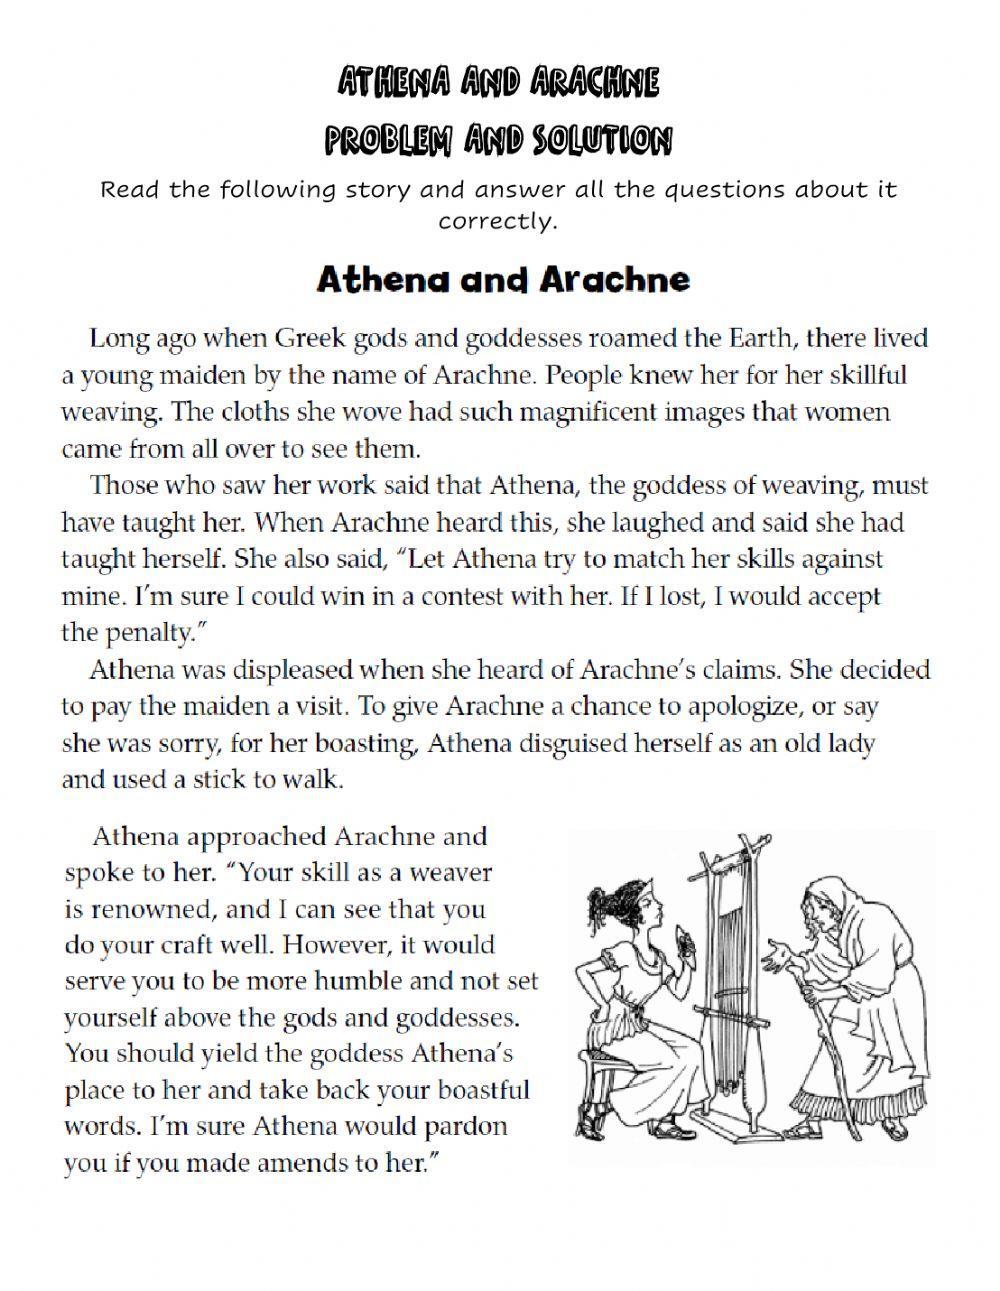 Athena and Arachne Problem and Solution